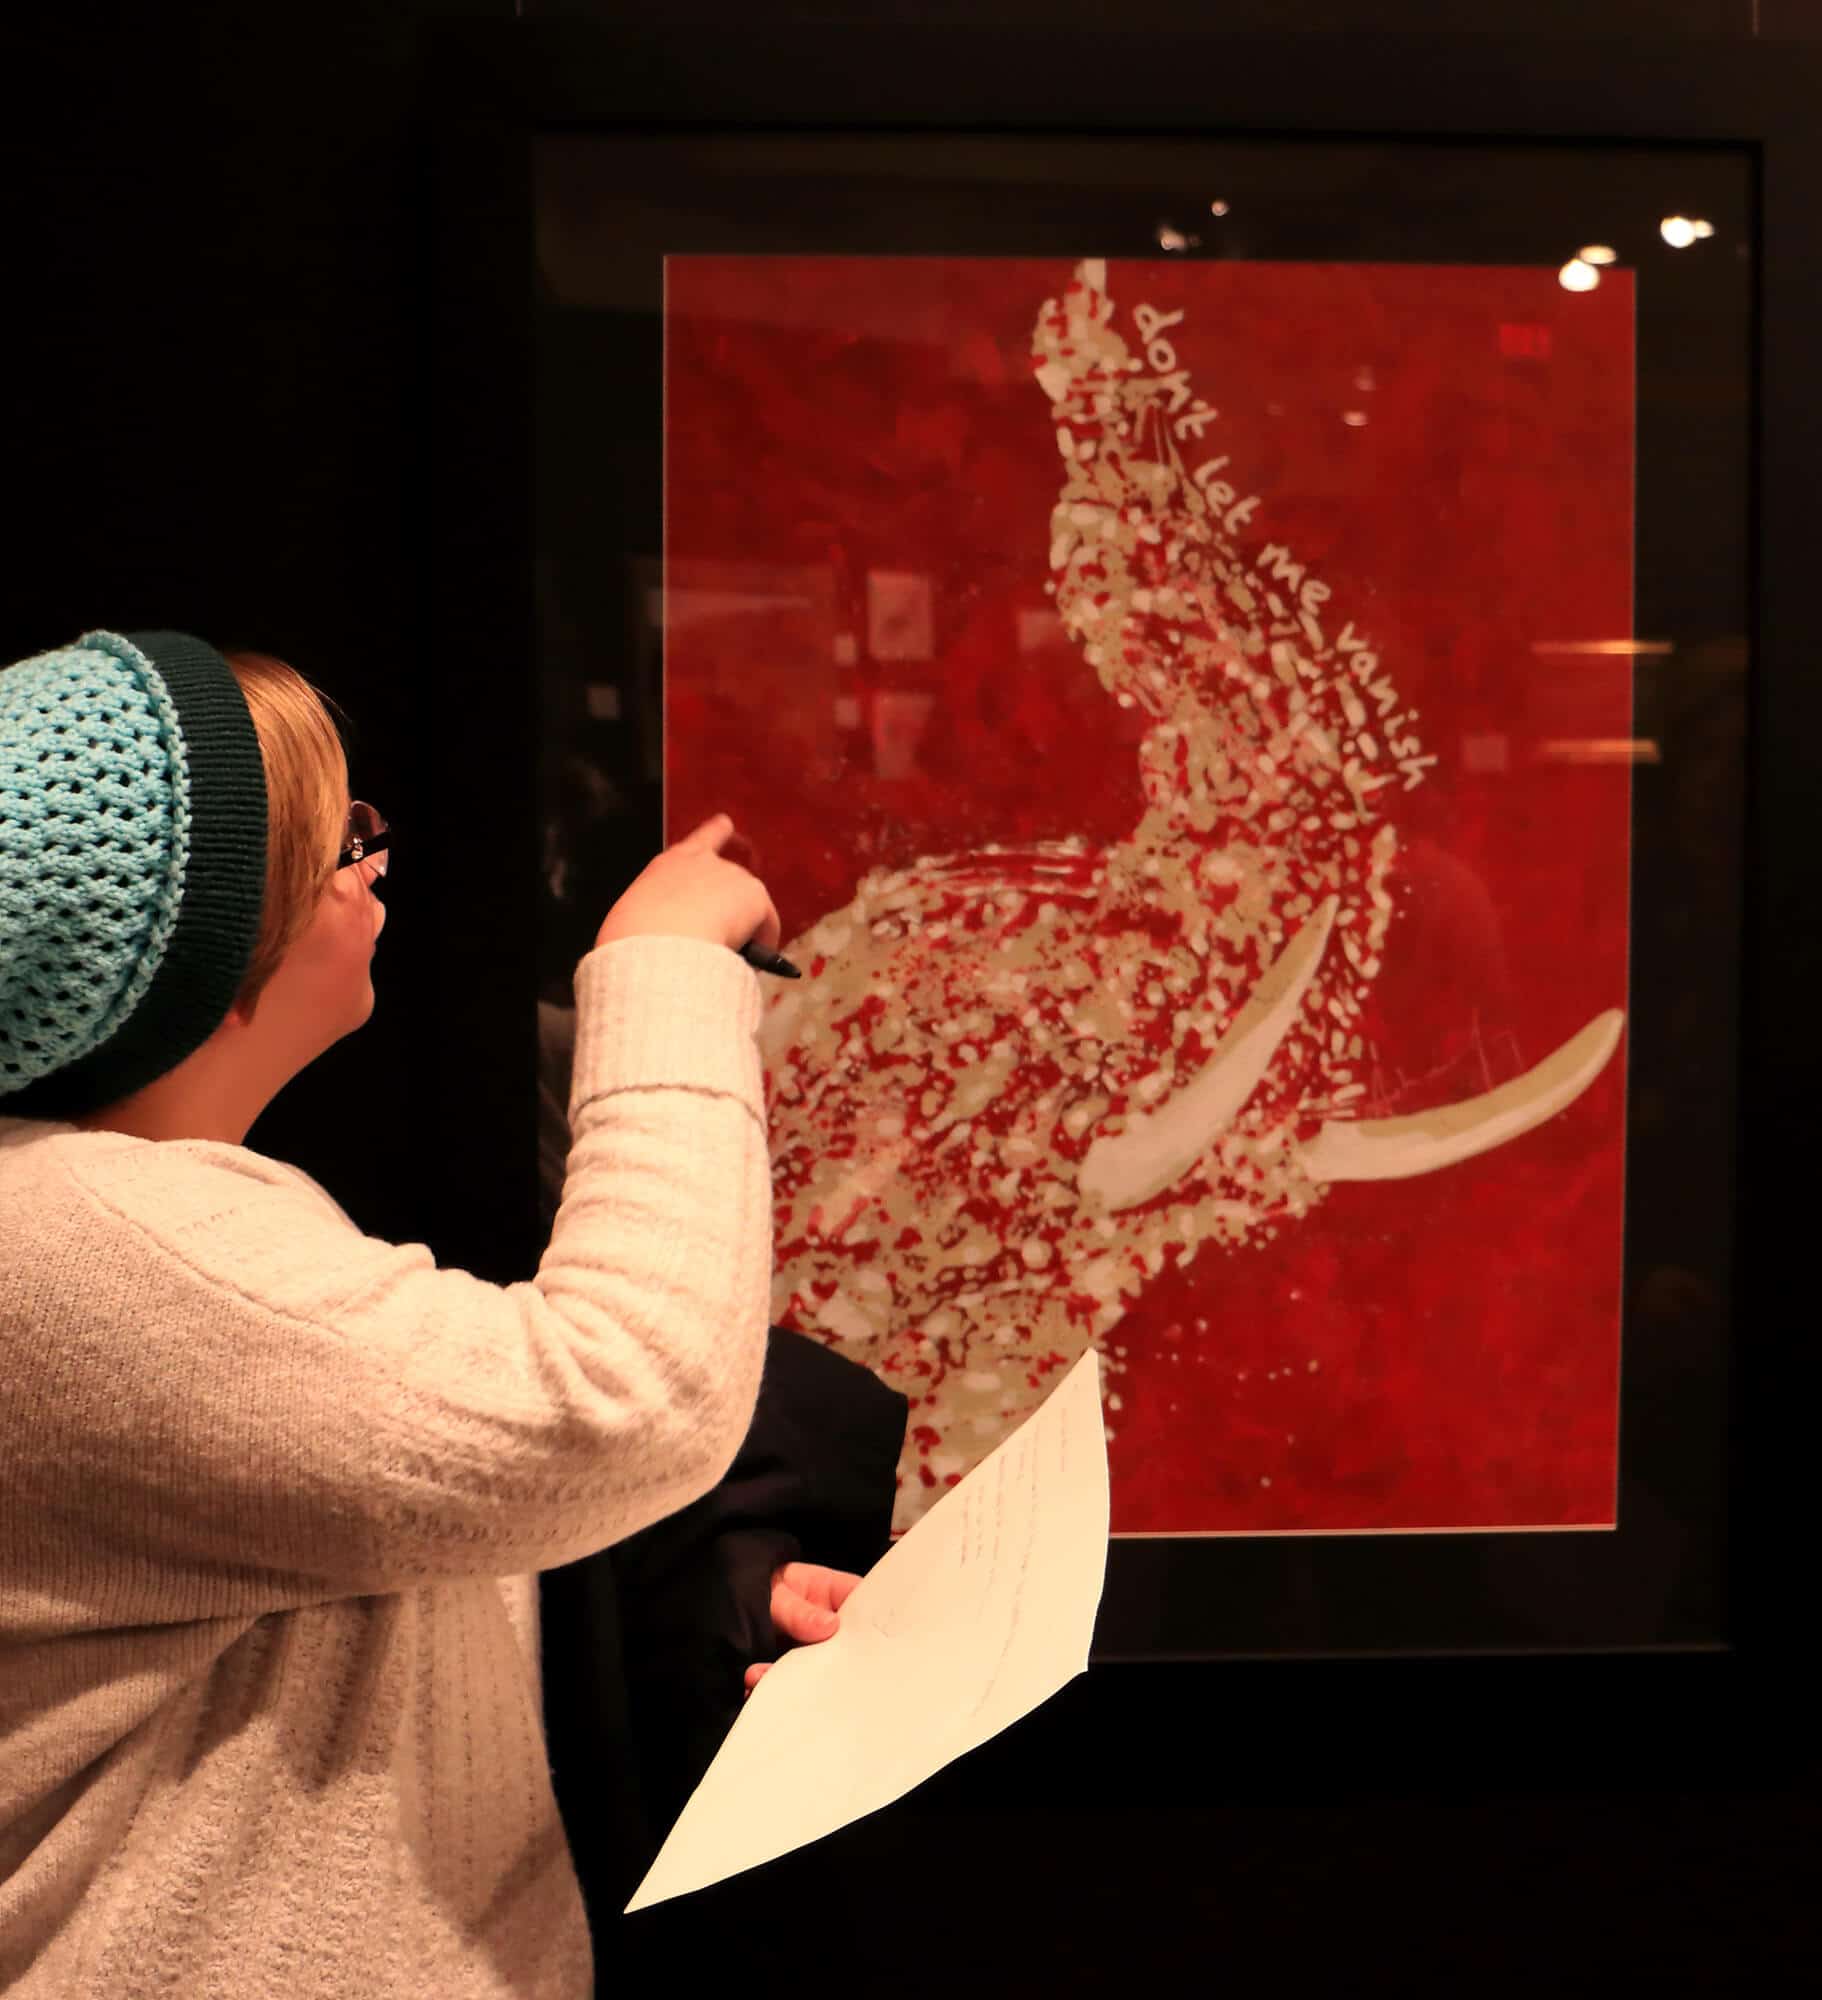 Student pointing at a artistic rendering of an elephant head